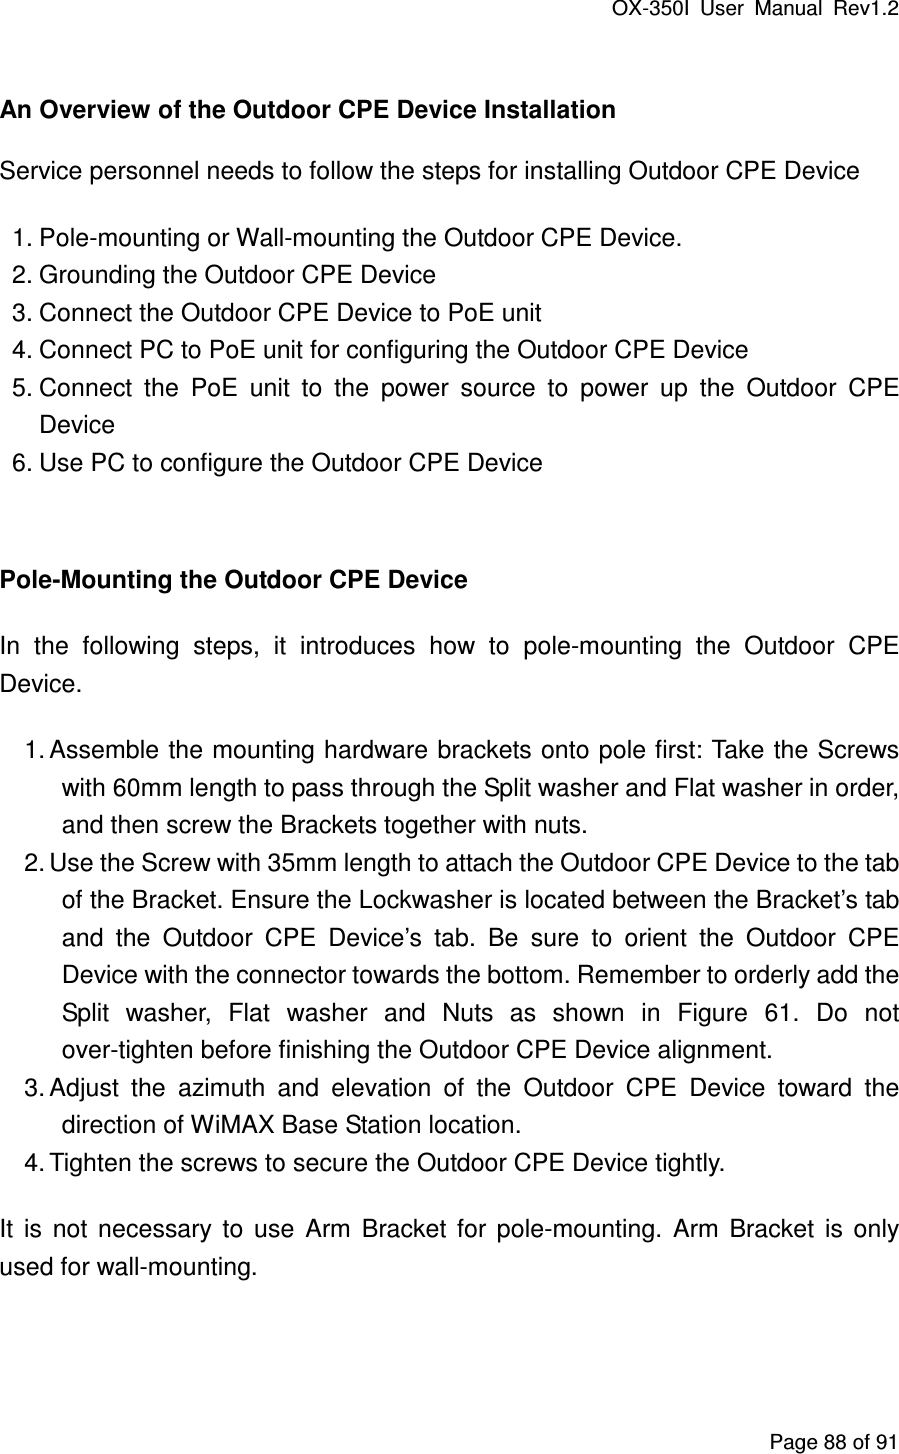 OX-350I  User  Manual  Rev1.2 Page 88 of 91  An Overview of the Outdoor CPE Device Installation Service personnel needs to follow the steps for installing Outdoor CPE Device   1. Pole-mounting or Wall-mounting the Outdoor CPE Device.   2. Grounding the Outdoor CPE Device 3. Connect the Outdoor CPE Device to PoE unit 4. Connect PC to PoE unit for configuring the Outdoor CPE Device 5. Connect  the  PoE  unit  to  the  power  source  to  power  up  the  Outdoor  CPE Device 6. Use PC to configure the Outdoor CPE Device  Pole-Mounting the Outdoor CPE Device In  the  following  steps,  it  introduces  how  to  pole-mounting  the  Outdoor  CPE Device. 1. Assemble the mounting hardware brackets onto pole first: Take the Screws with 60mm length to pass through the Split washer and Flat washer in order, and then screw the Brackets together with nuts. 2. Use the Screw with 35mm length to attach the Outdoor CPE Device to the tab of the Bracket. Ensure the Lockwasher is located between the Bracket’s tab and  the  Outdoor  CPE  Device’s  tab.  Be  sure  to  orient  the  Outdoor  CPE Device with the connector towards the bottom. Remember to orderly add the Split  washer,  Flat  washer  and  Nuts  as  shown  in  Figure  61.  Do  not over-tighten before finishing the Outdoor CPE Device alignment. 3. Adjust  the  azimuth  and  elevation  of  the  Outdoor  CPE  Device  toward  the direction of WiMAX Base Station location. 4. Tighten the screws to secure the Outdoor CPE Device tightly. It  is  not  necessary  to  use  Arm  Bracket  for  pole-mounting.  Arm  Bracket  is  only used for wall-mounting.   